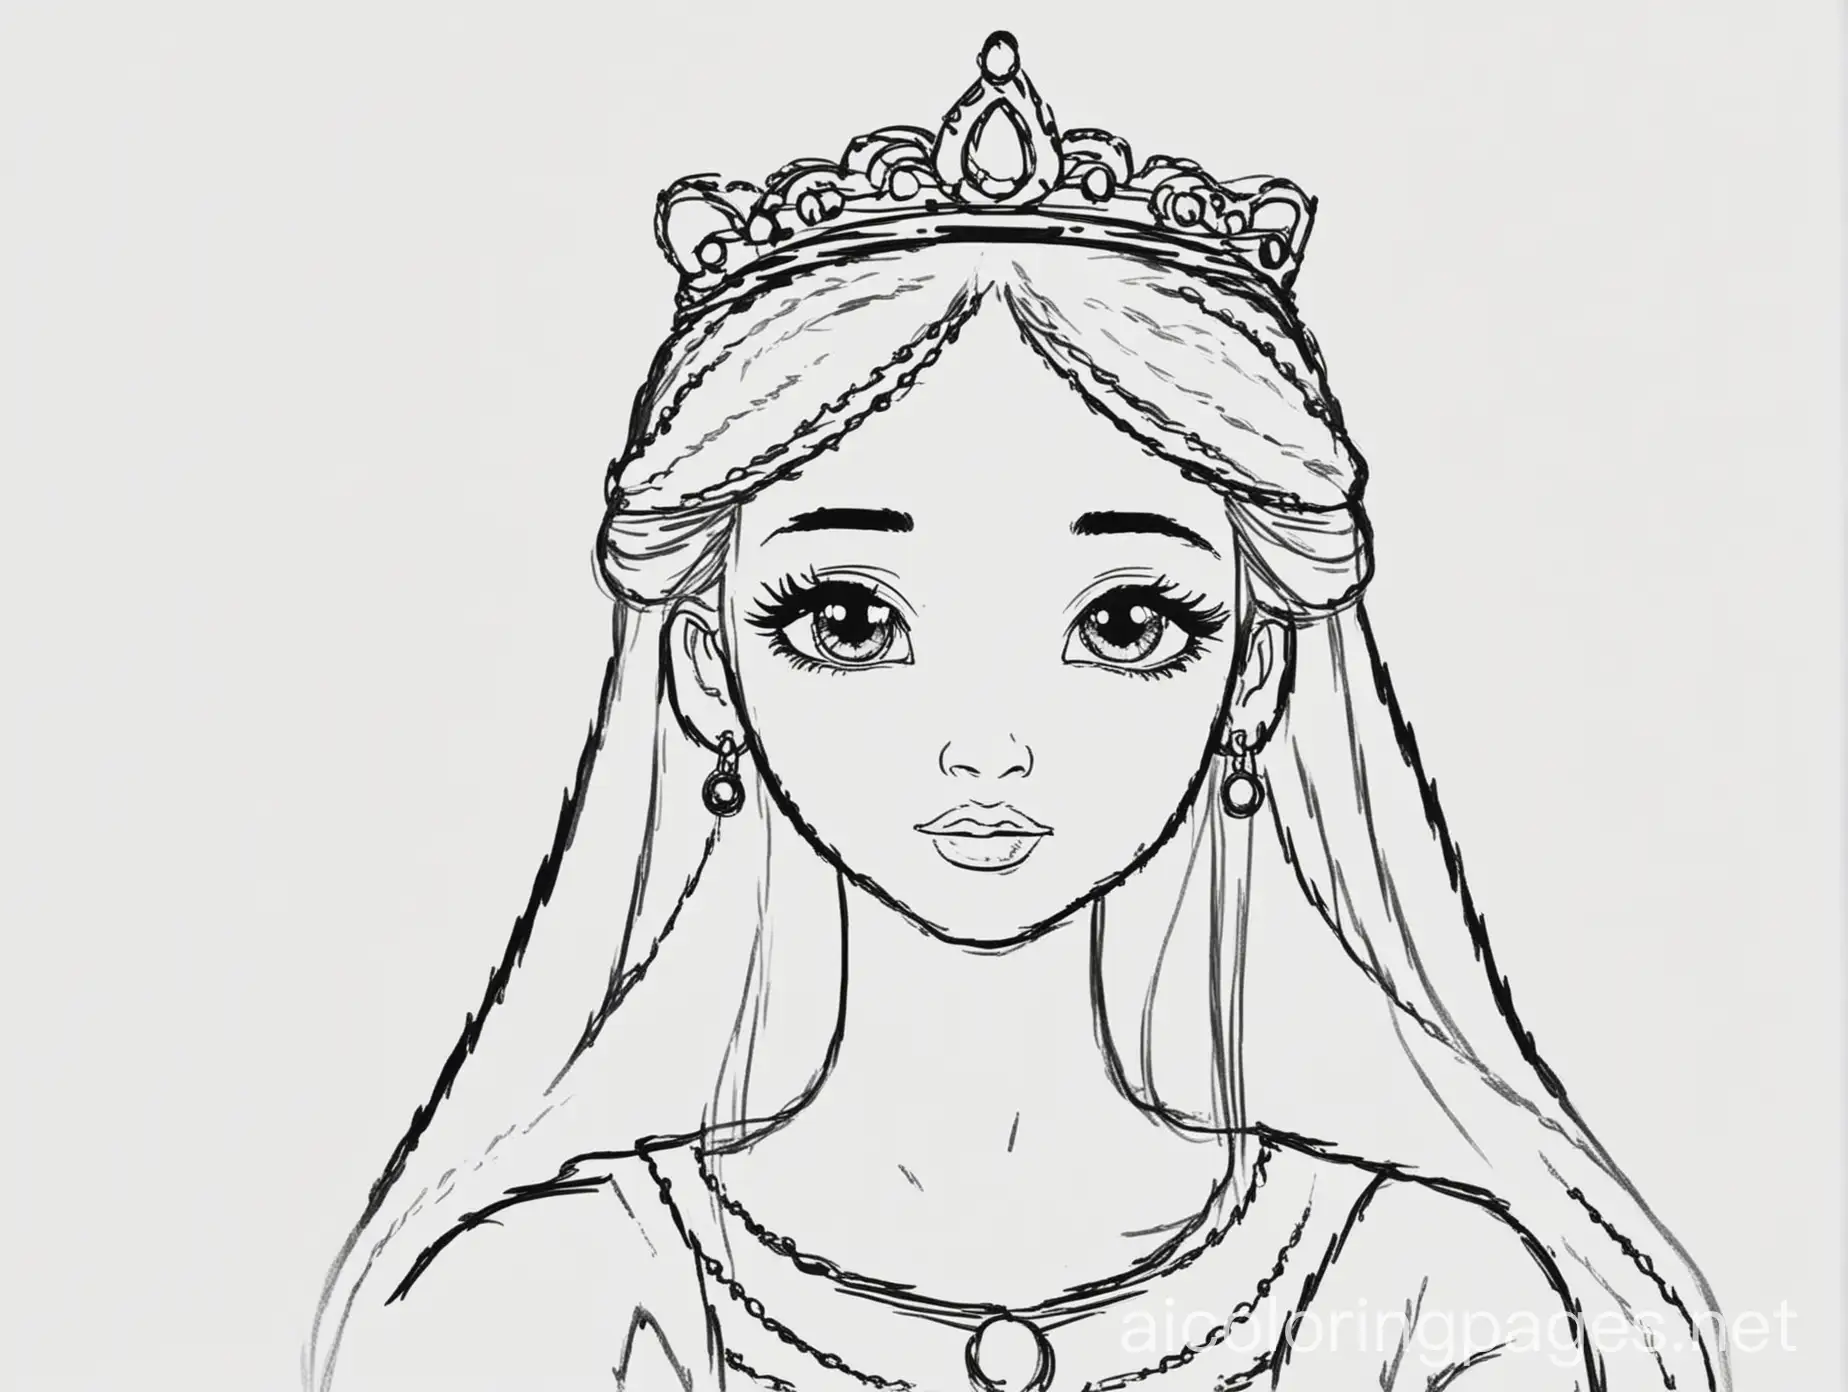 Princess, Coloring Page, black and white, line art, white background, Simplicity, Ample White Space. The background of the coloring page is plain white to make it easy for young children to color within the lines. The outlines of all the subjects are easy to distinguish, making it simple for kids to color without too much difficulty